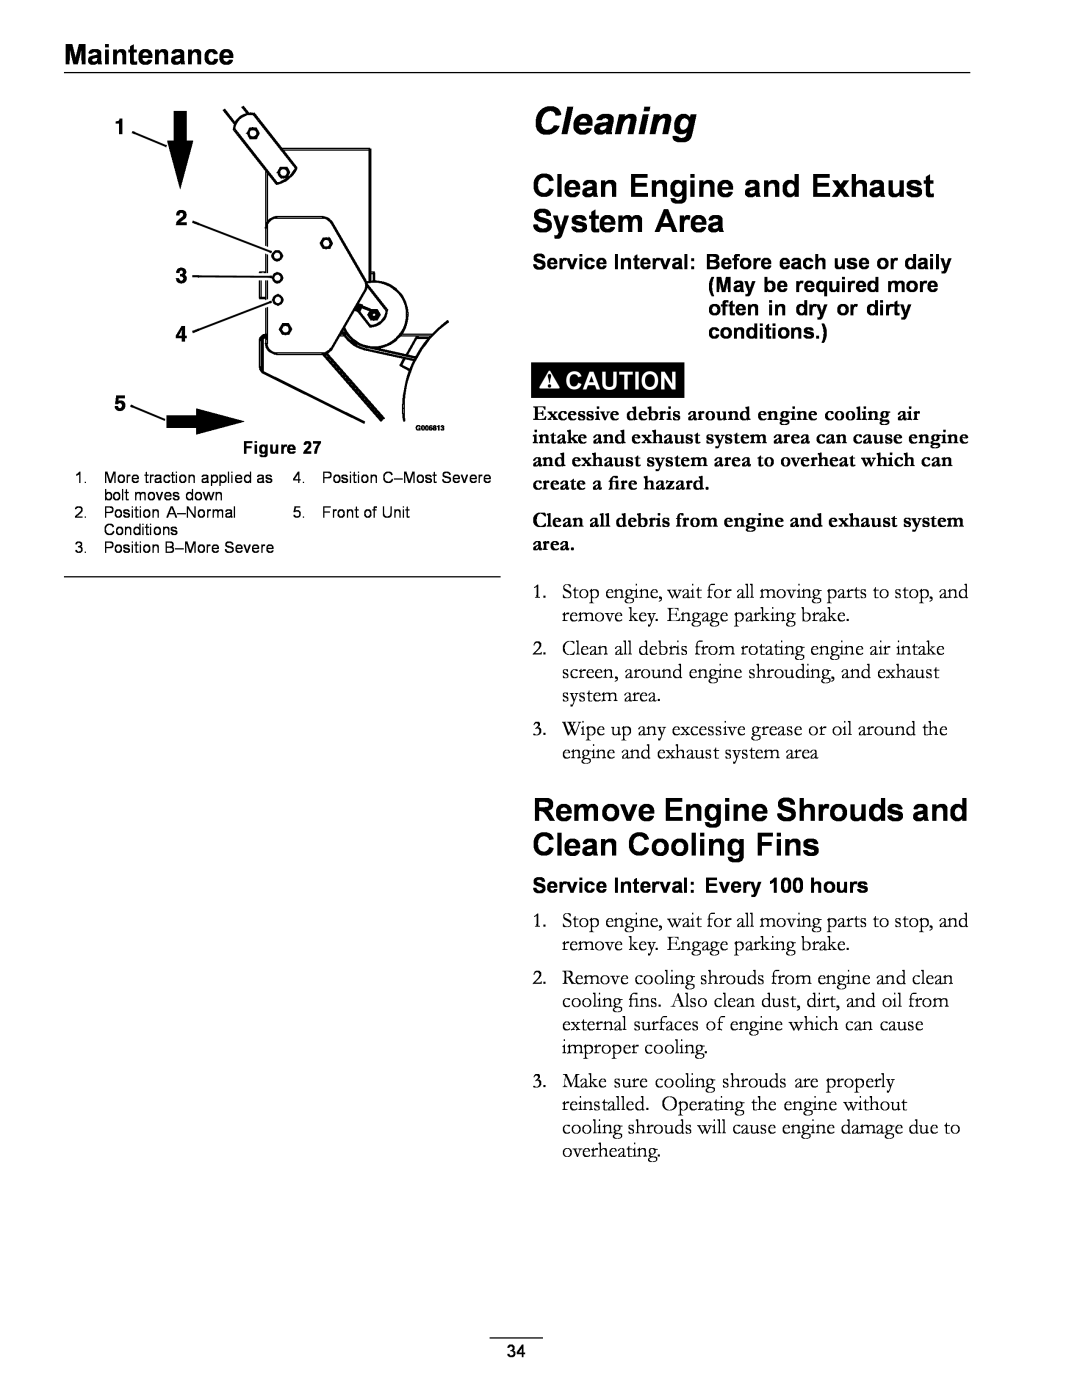 Exmark 850 manual Cleaning, Clean Engine and Exhaust System Area, Remove Engine Shrouds and Clean Cooling Fins, Maintenance 